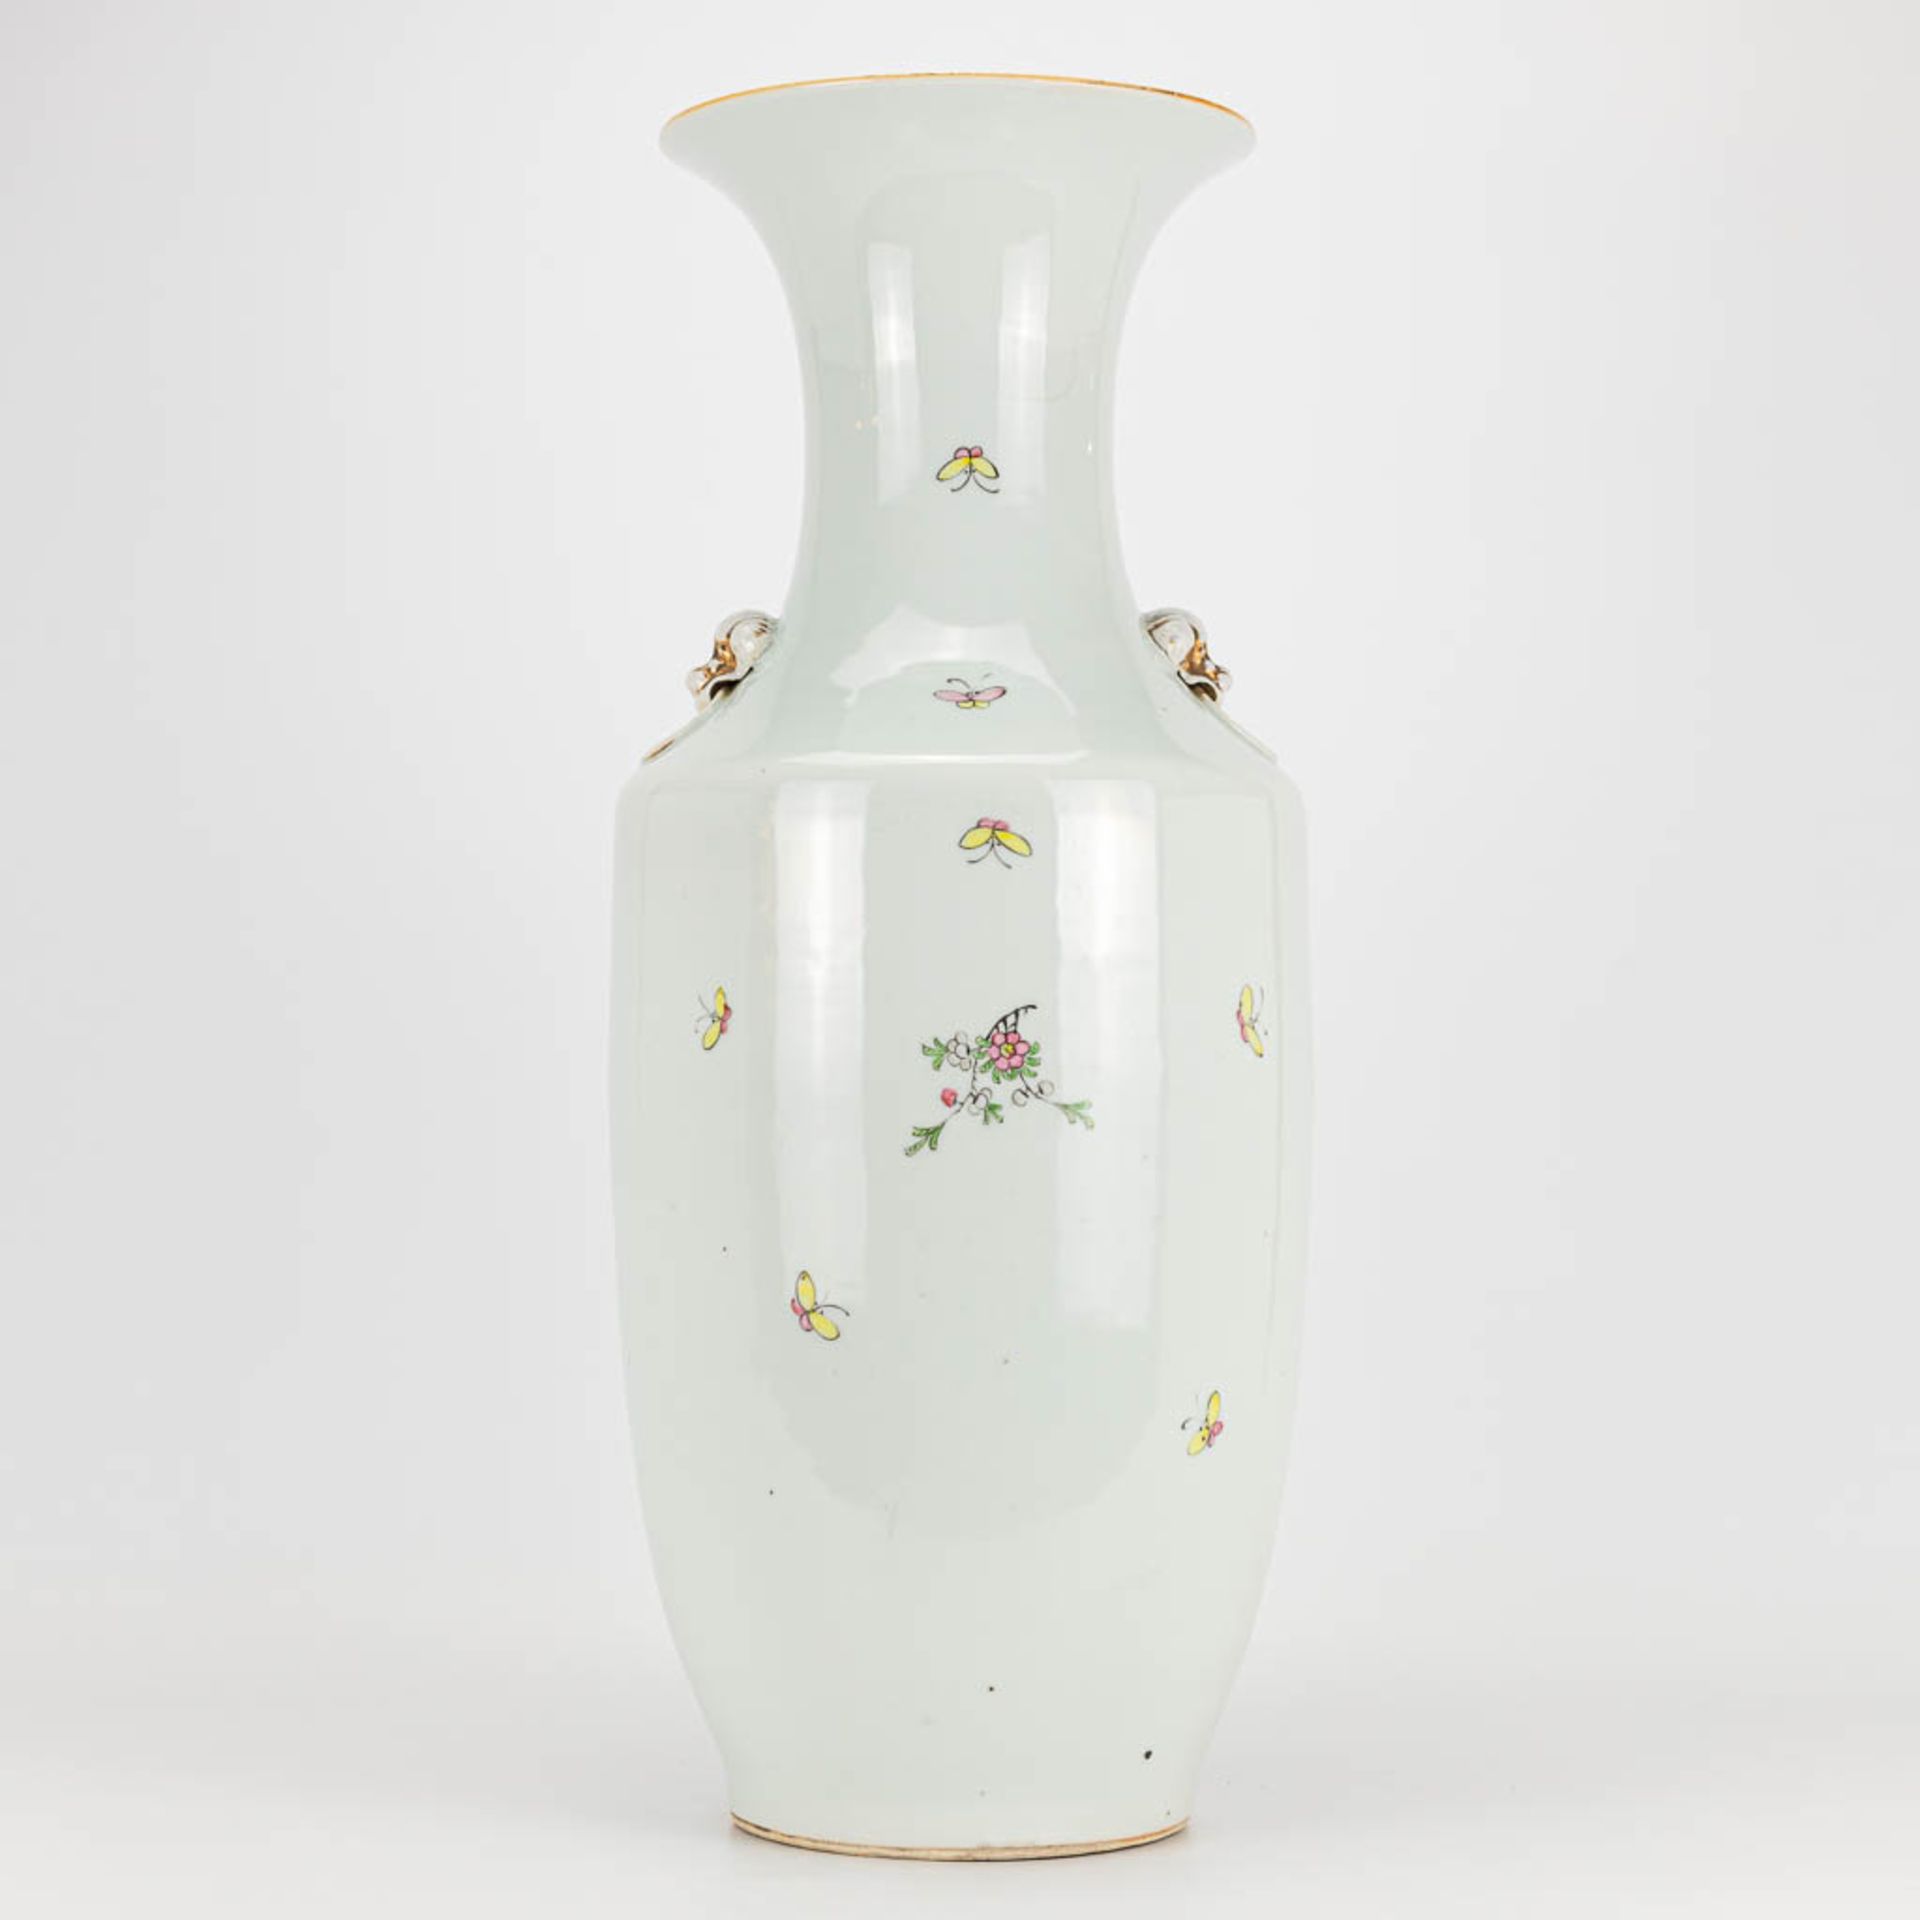 A vase made of Chinese porcelain and decorated with flowers and birds. - Image 6 of 16